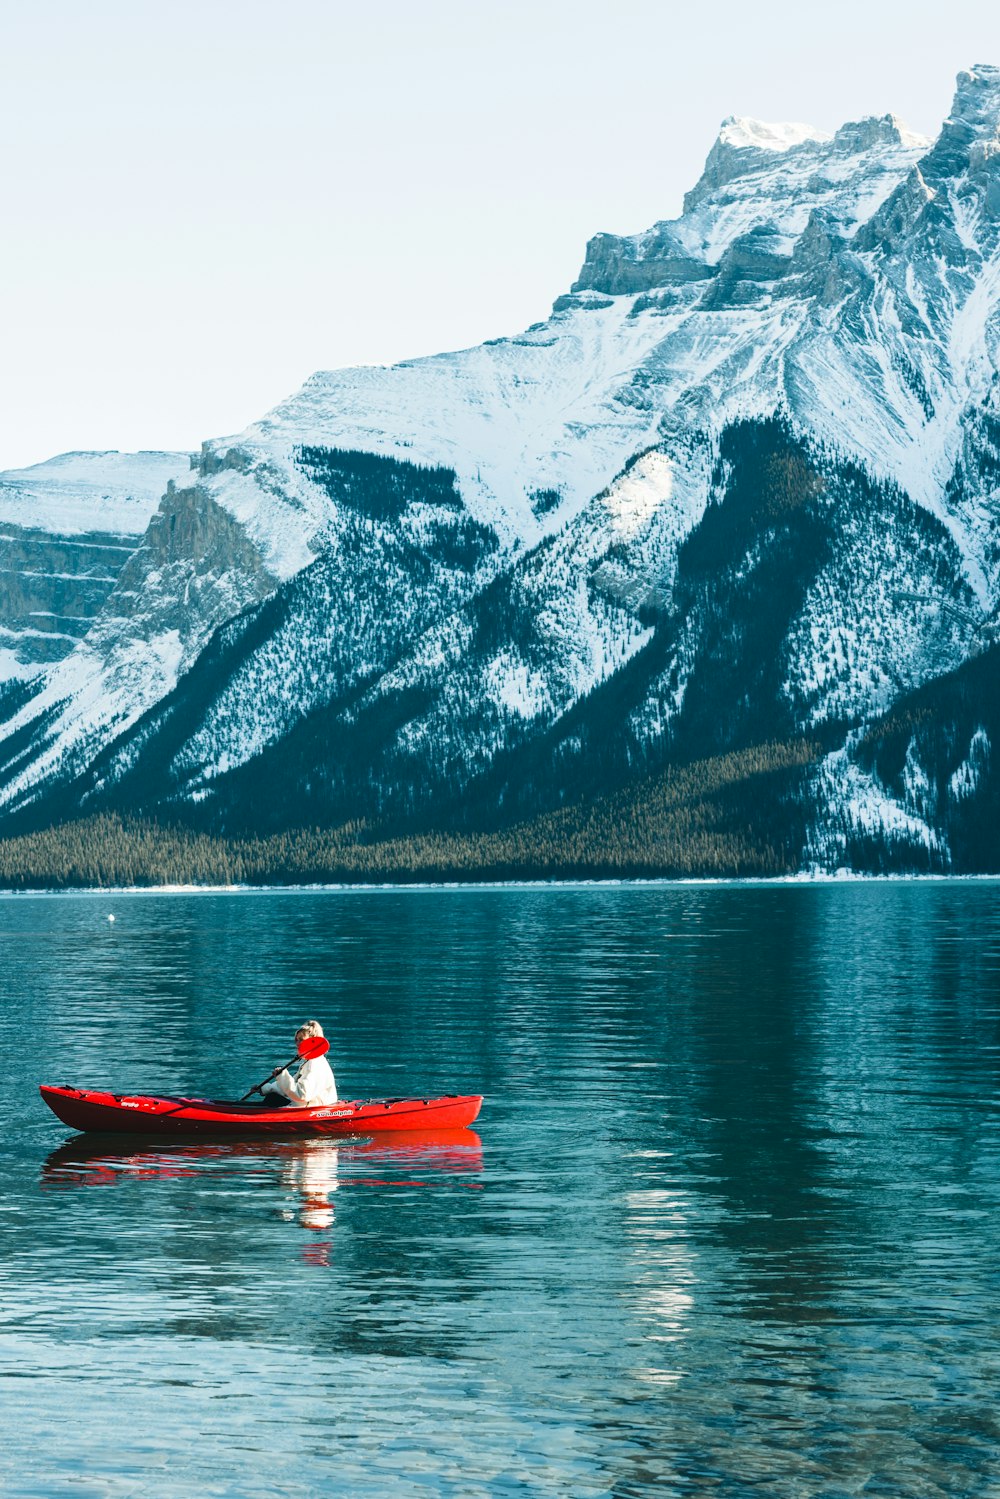 a man in a red canoe on a mountain lake